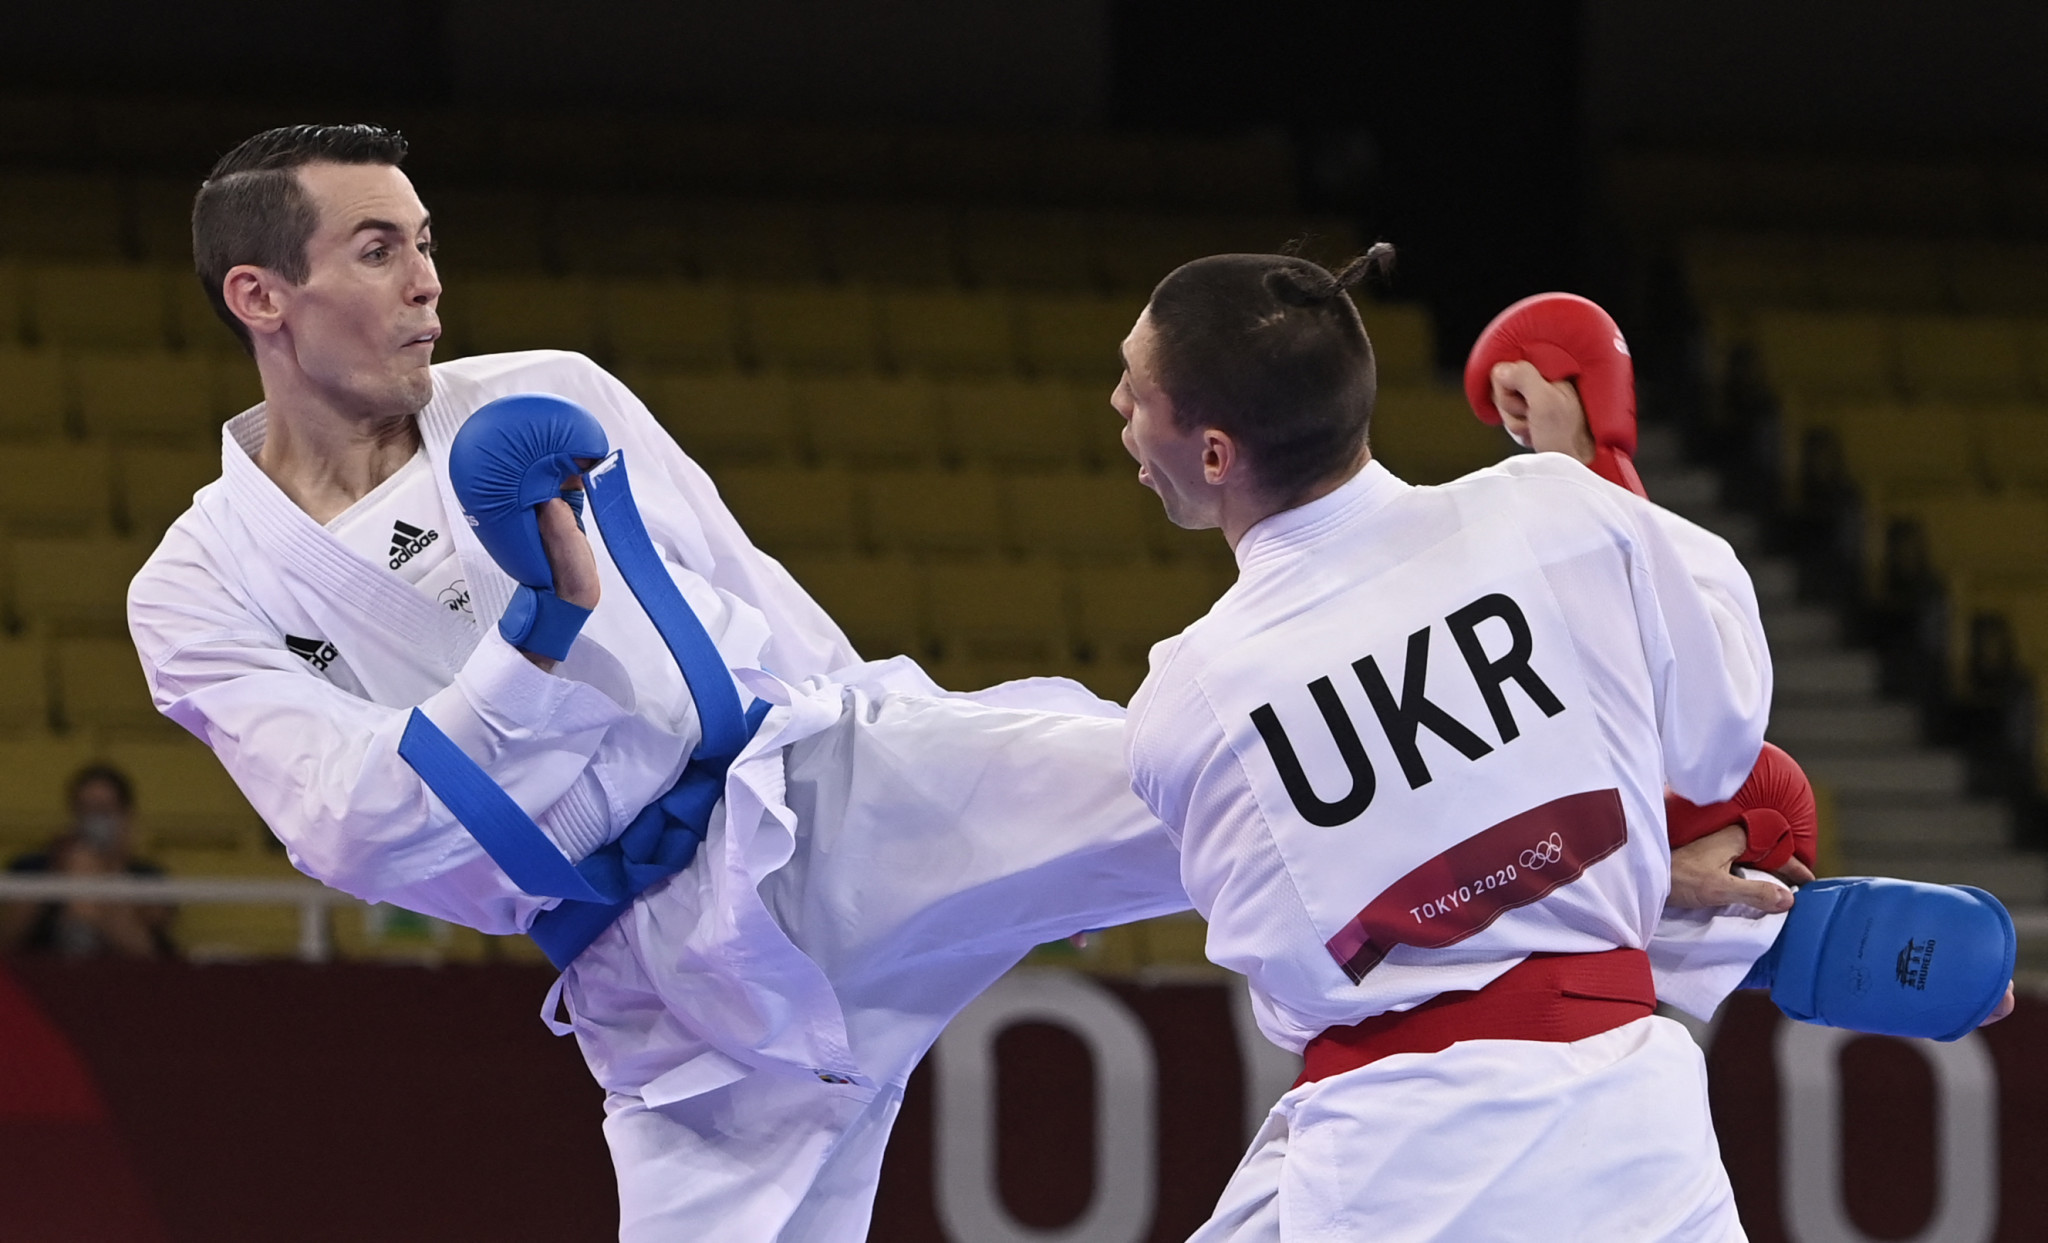 Horuna selling karate-gi worn to win Olympic medal to raise funds for Ukraine's military